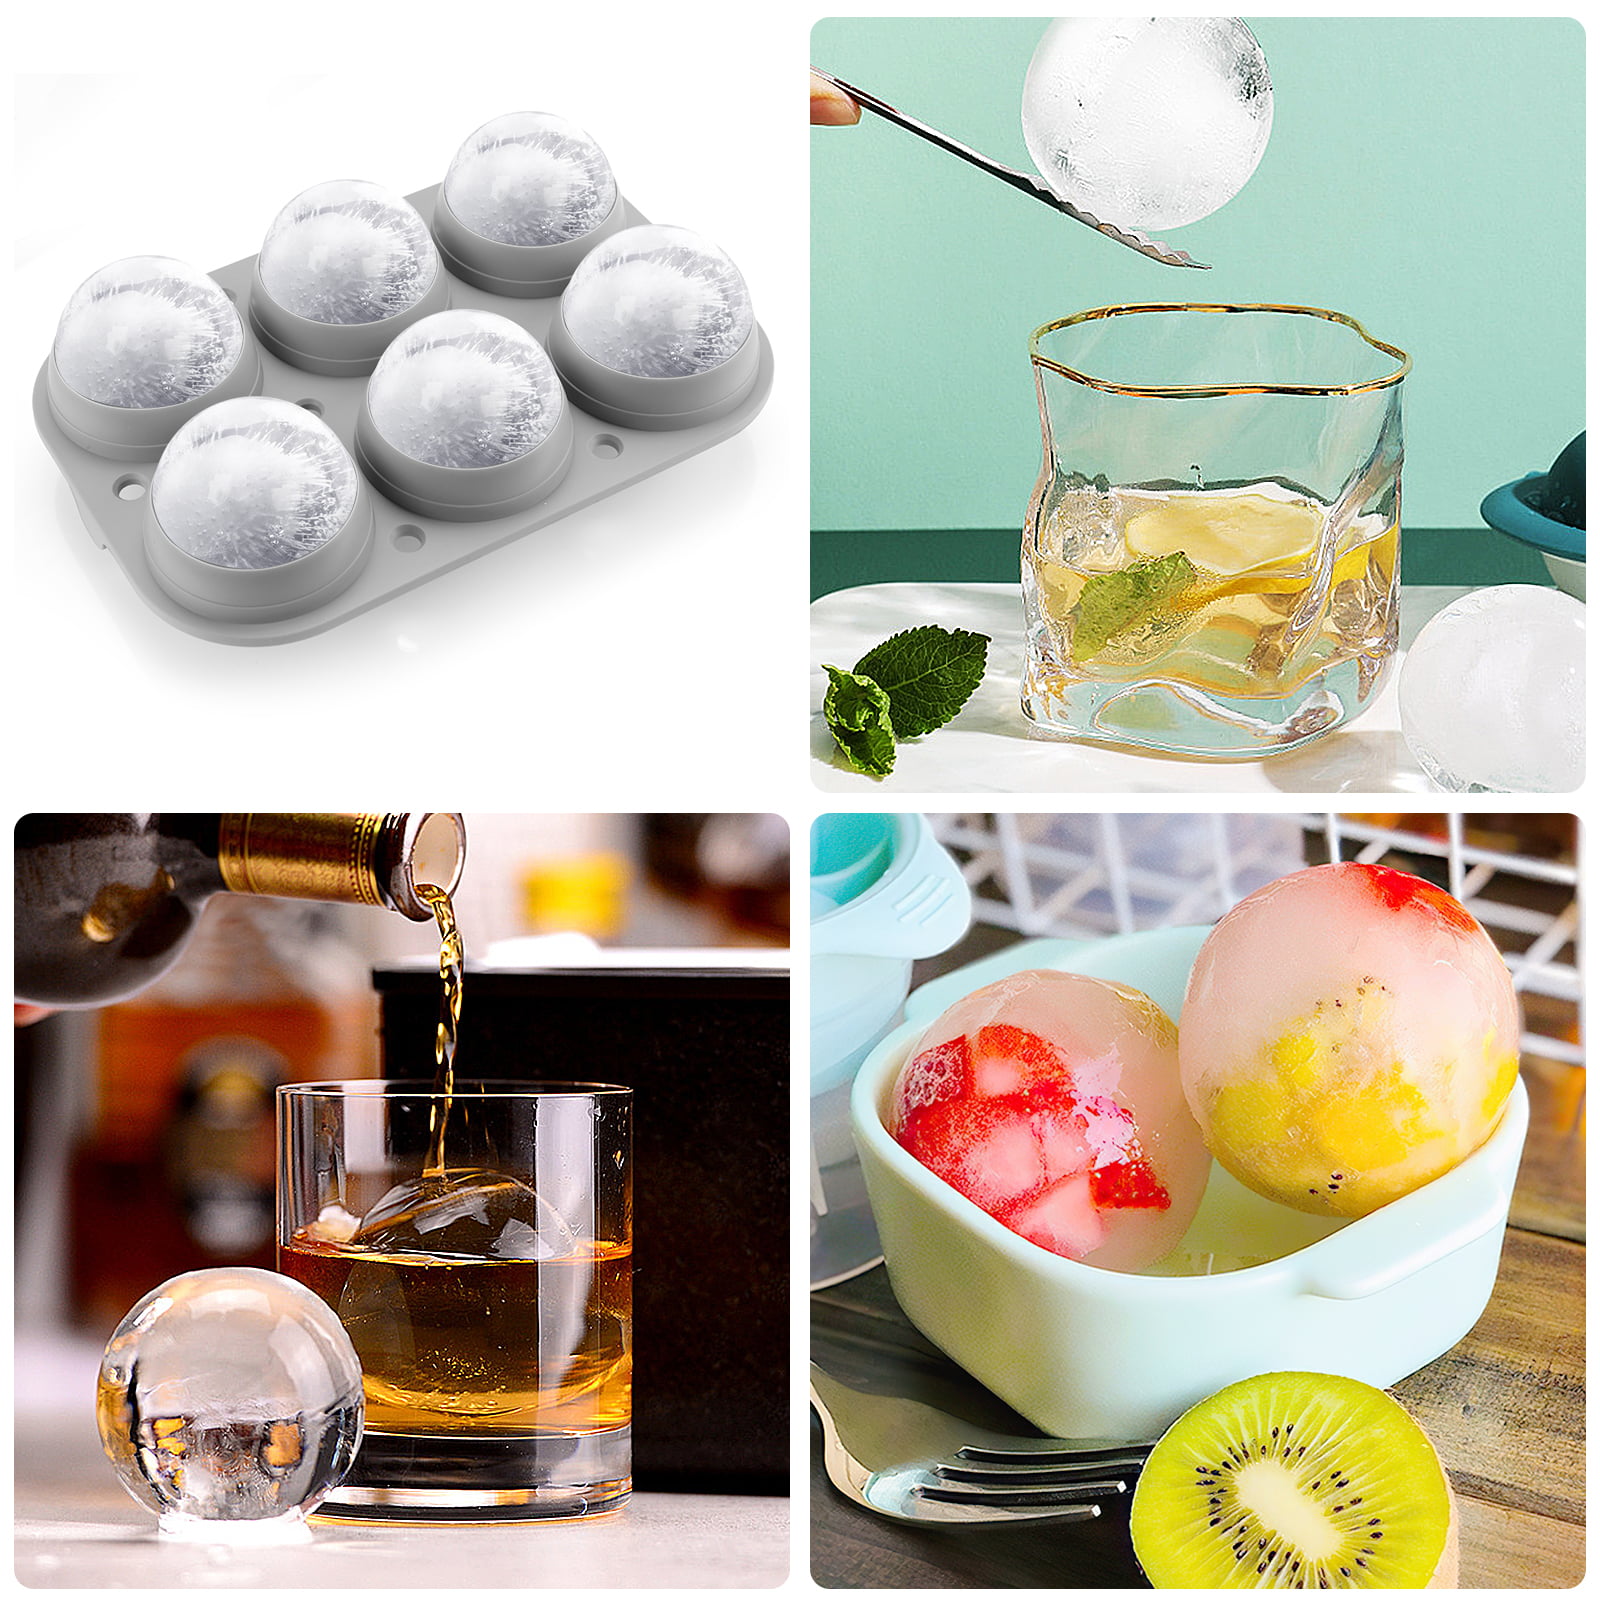 WIBIMEN Large Ice Cube Tray, 2.5 INCH Whiskey Ice Mold, 2 Pack Sphere Ice  Cube Mold with Bin&Tong, Leak-free Round Ice Cube Mold, Easy Fill & Release